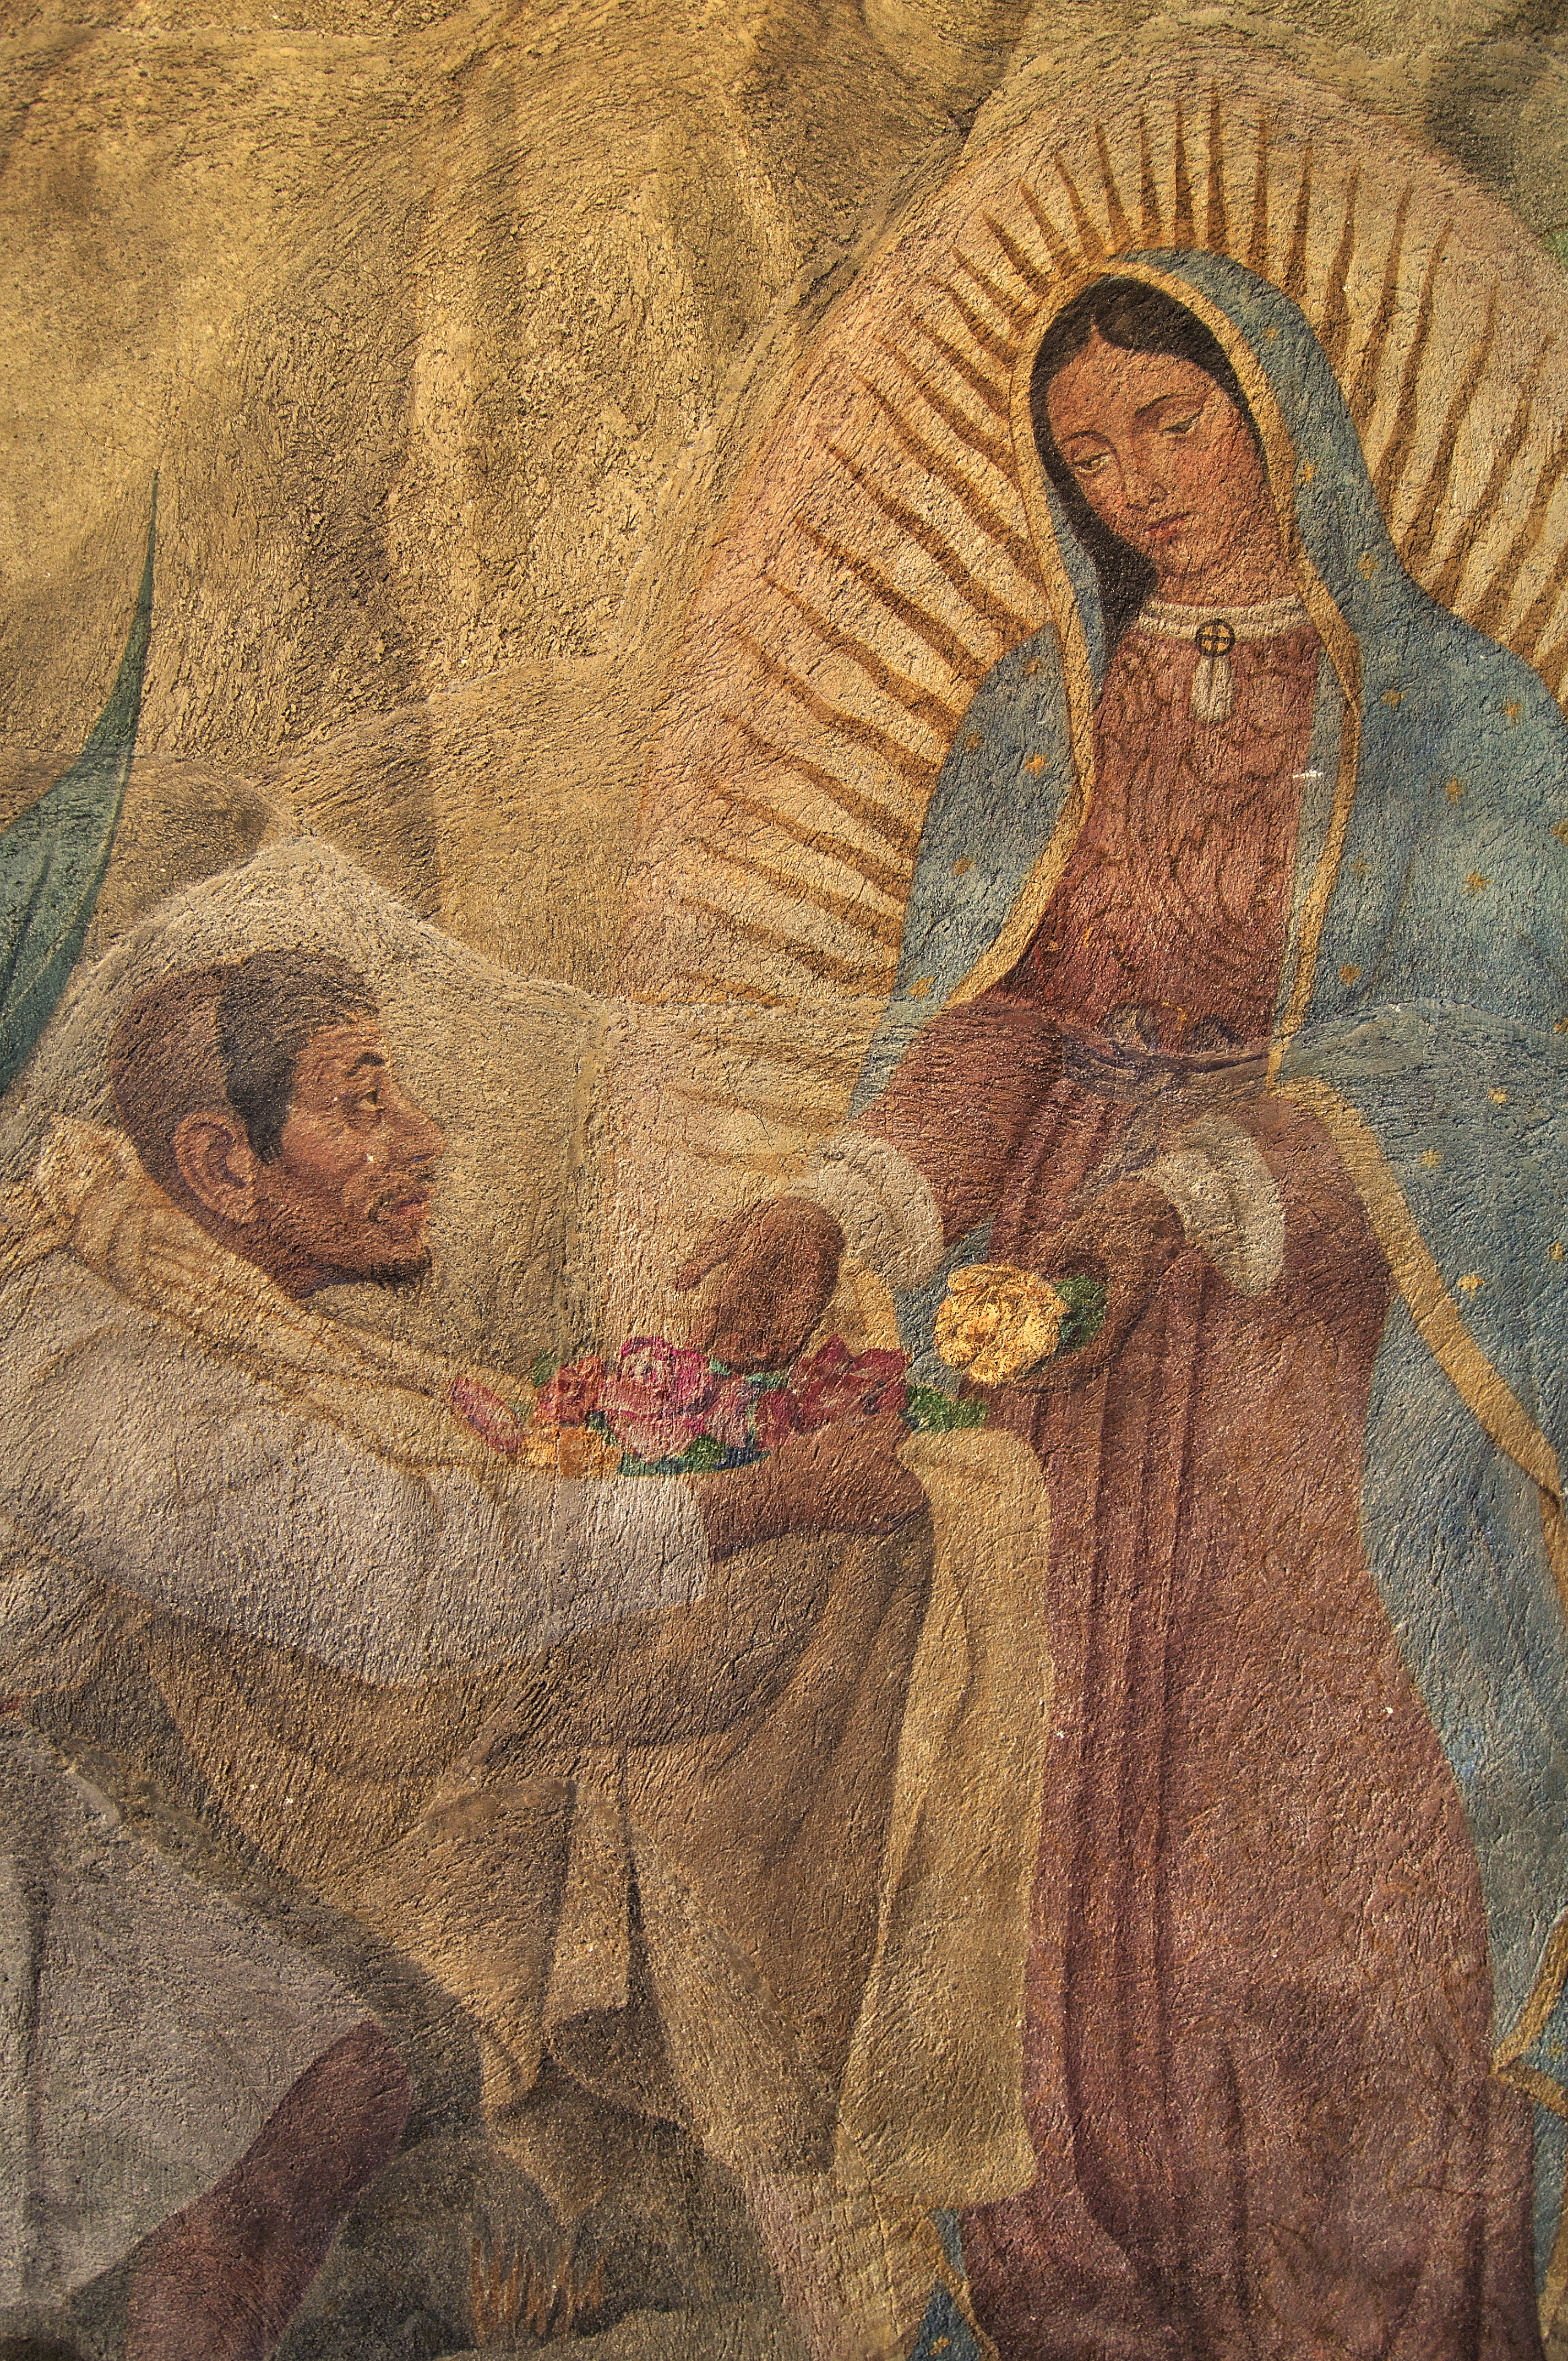 Our Lady of Guadalupe (Special Podcast Highlight)